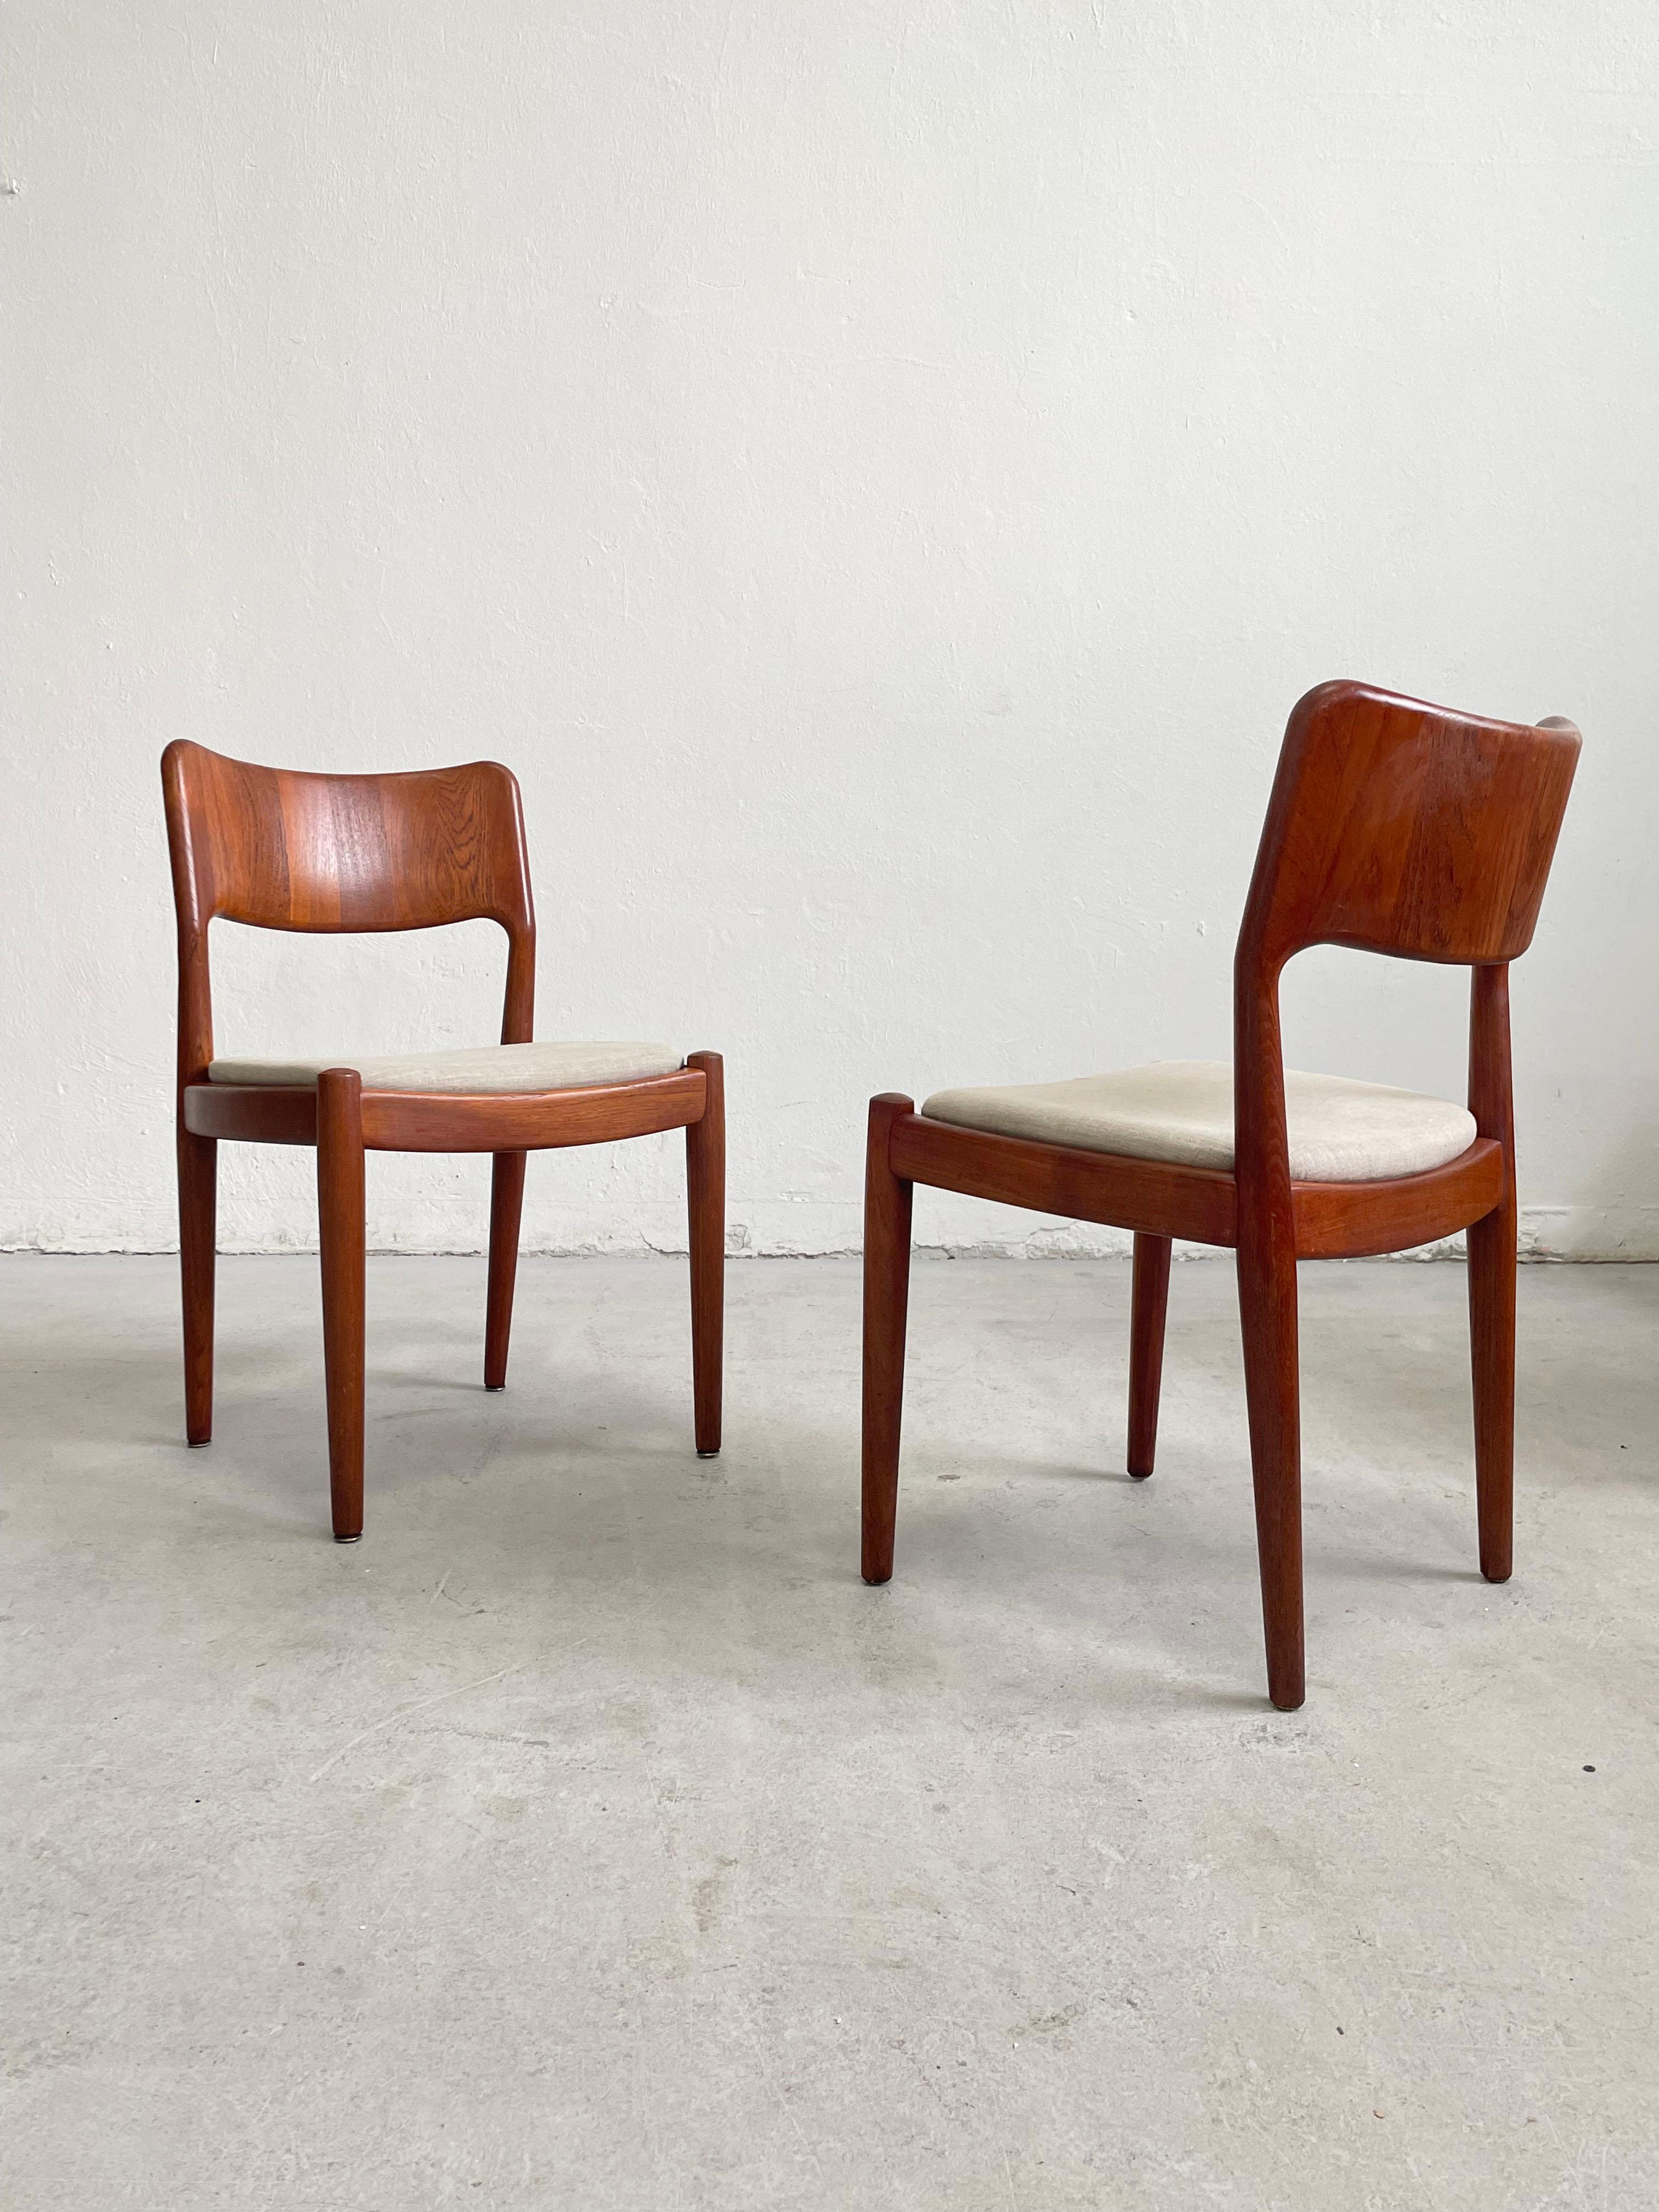 Set of 4 Vintage Scandinavian Mid-century Modern Teak Dining Chairs by Glostrup For Sale 1